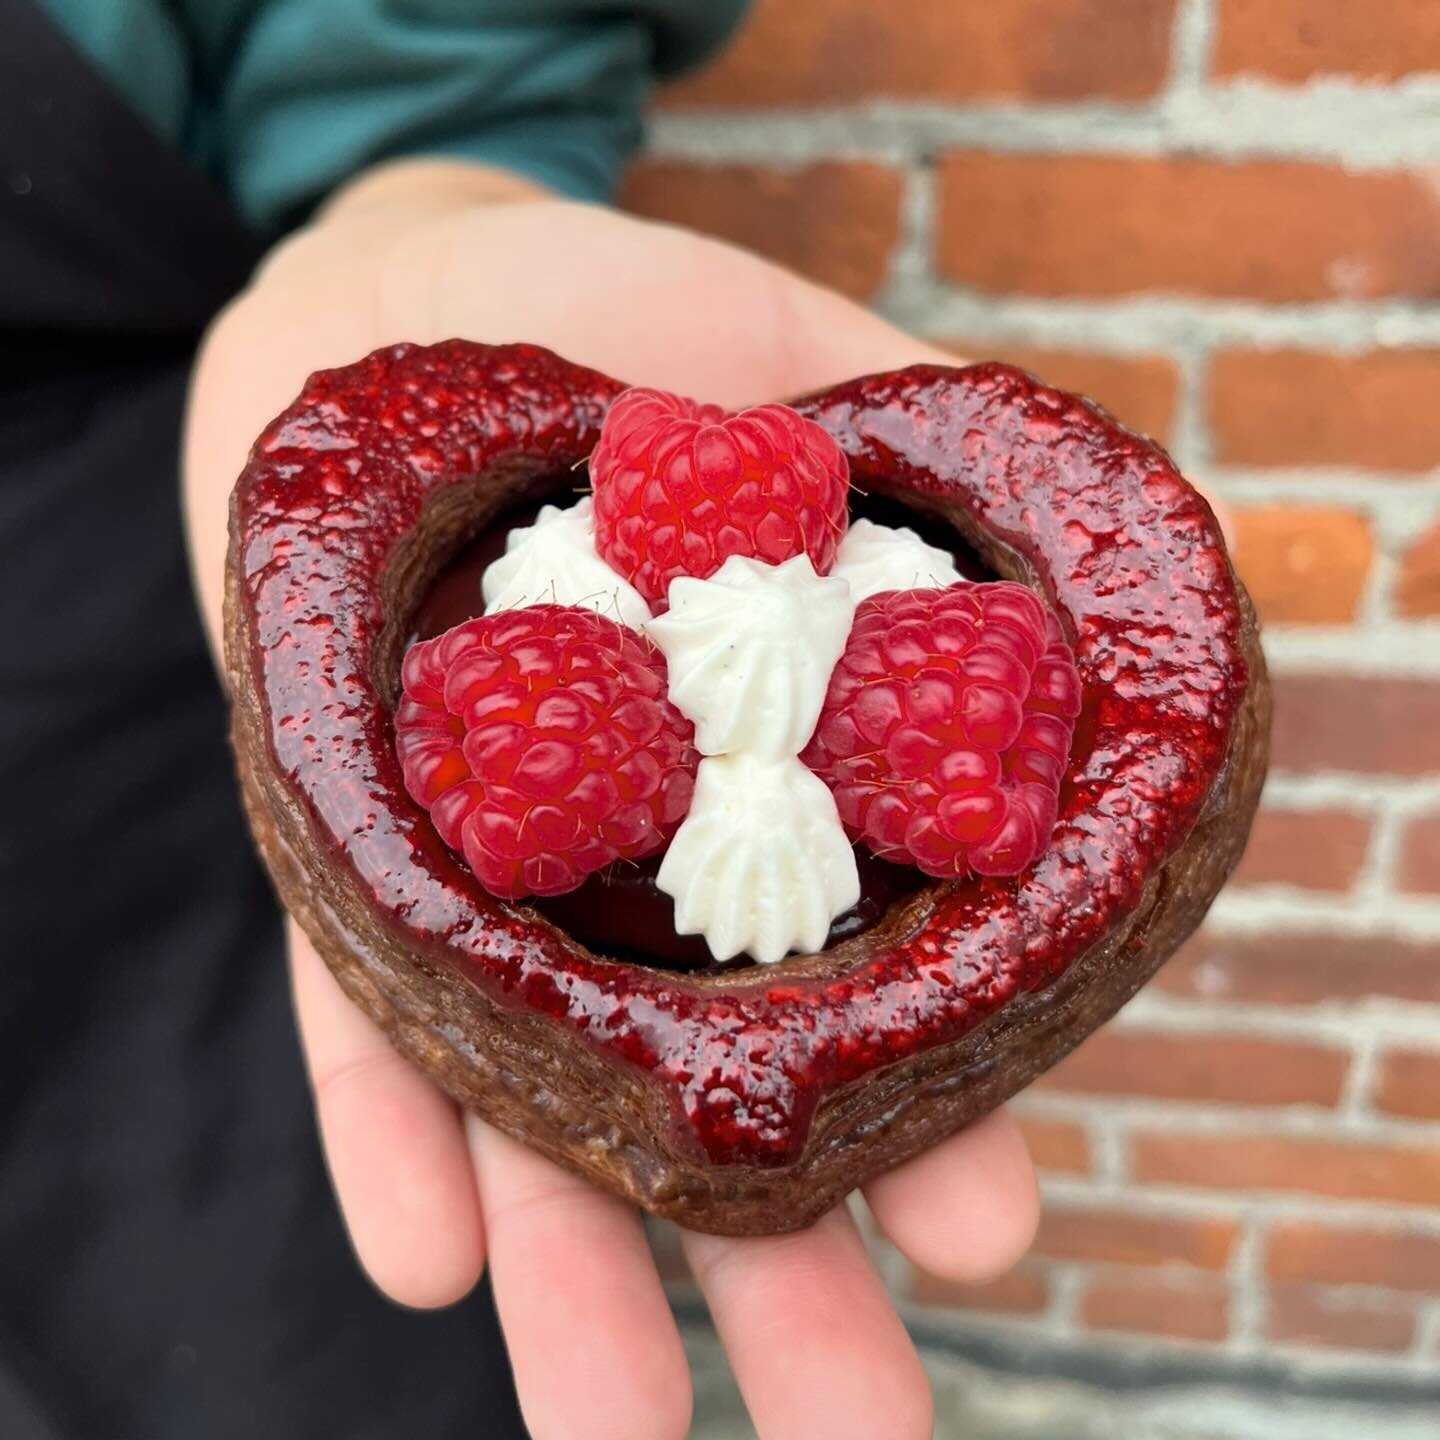 We had to make SOMETHING for Valentines Day!  This is  a chocolate raspberry heart ❤️ made with chocolate almond frangipane, raspberry chocolate pastry cream, fresh raspberries and vanilla whipped cream. Available today at @pkunderwearfactory and @th